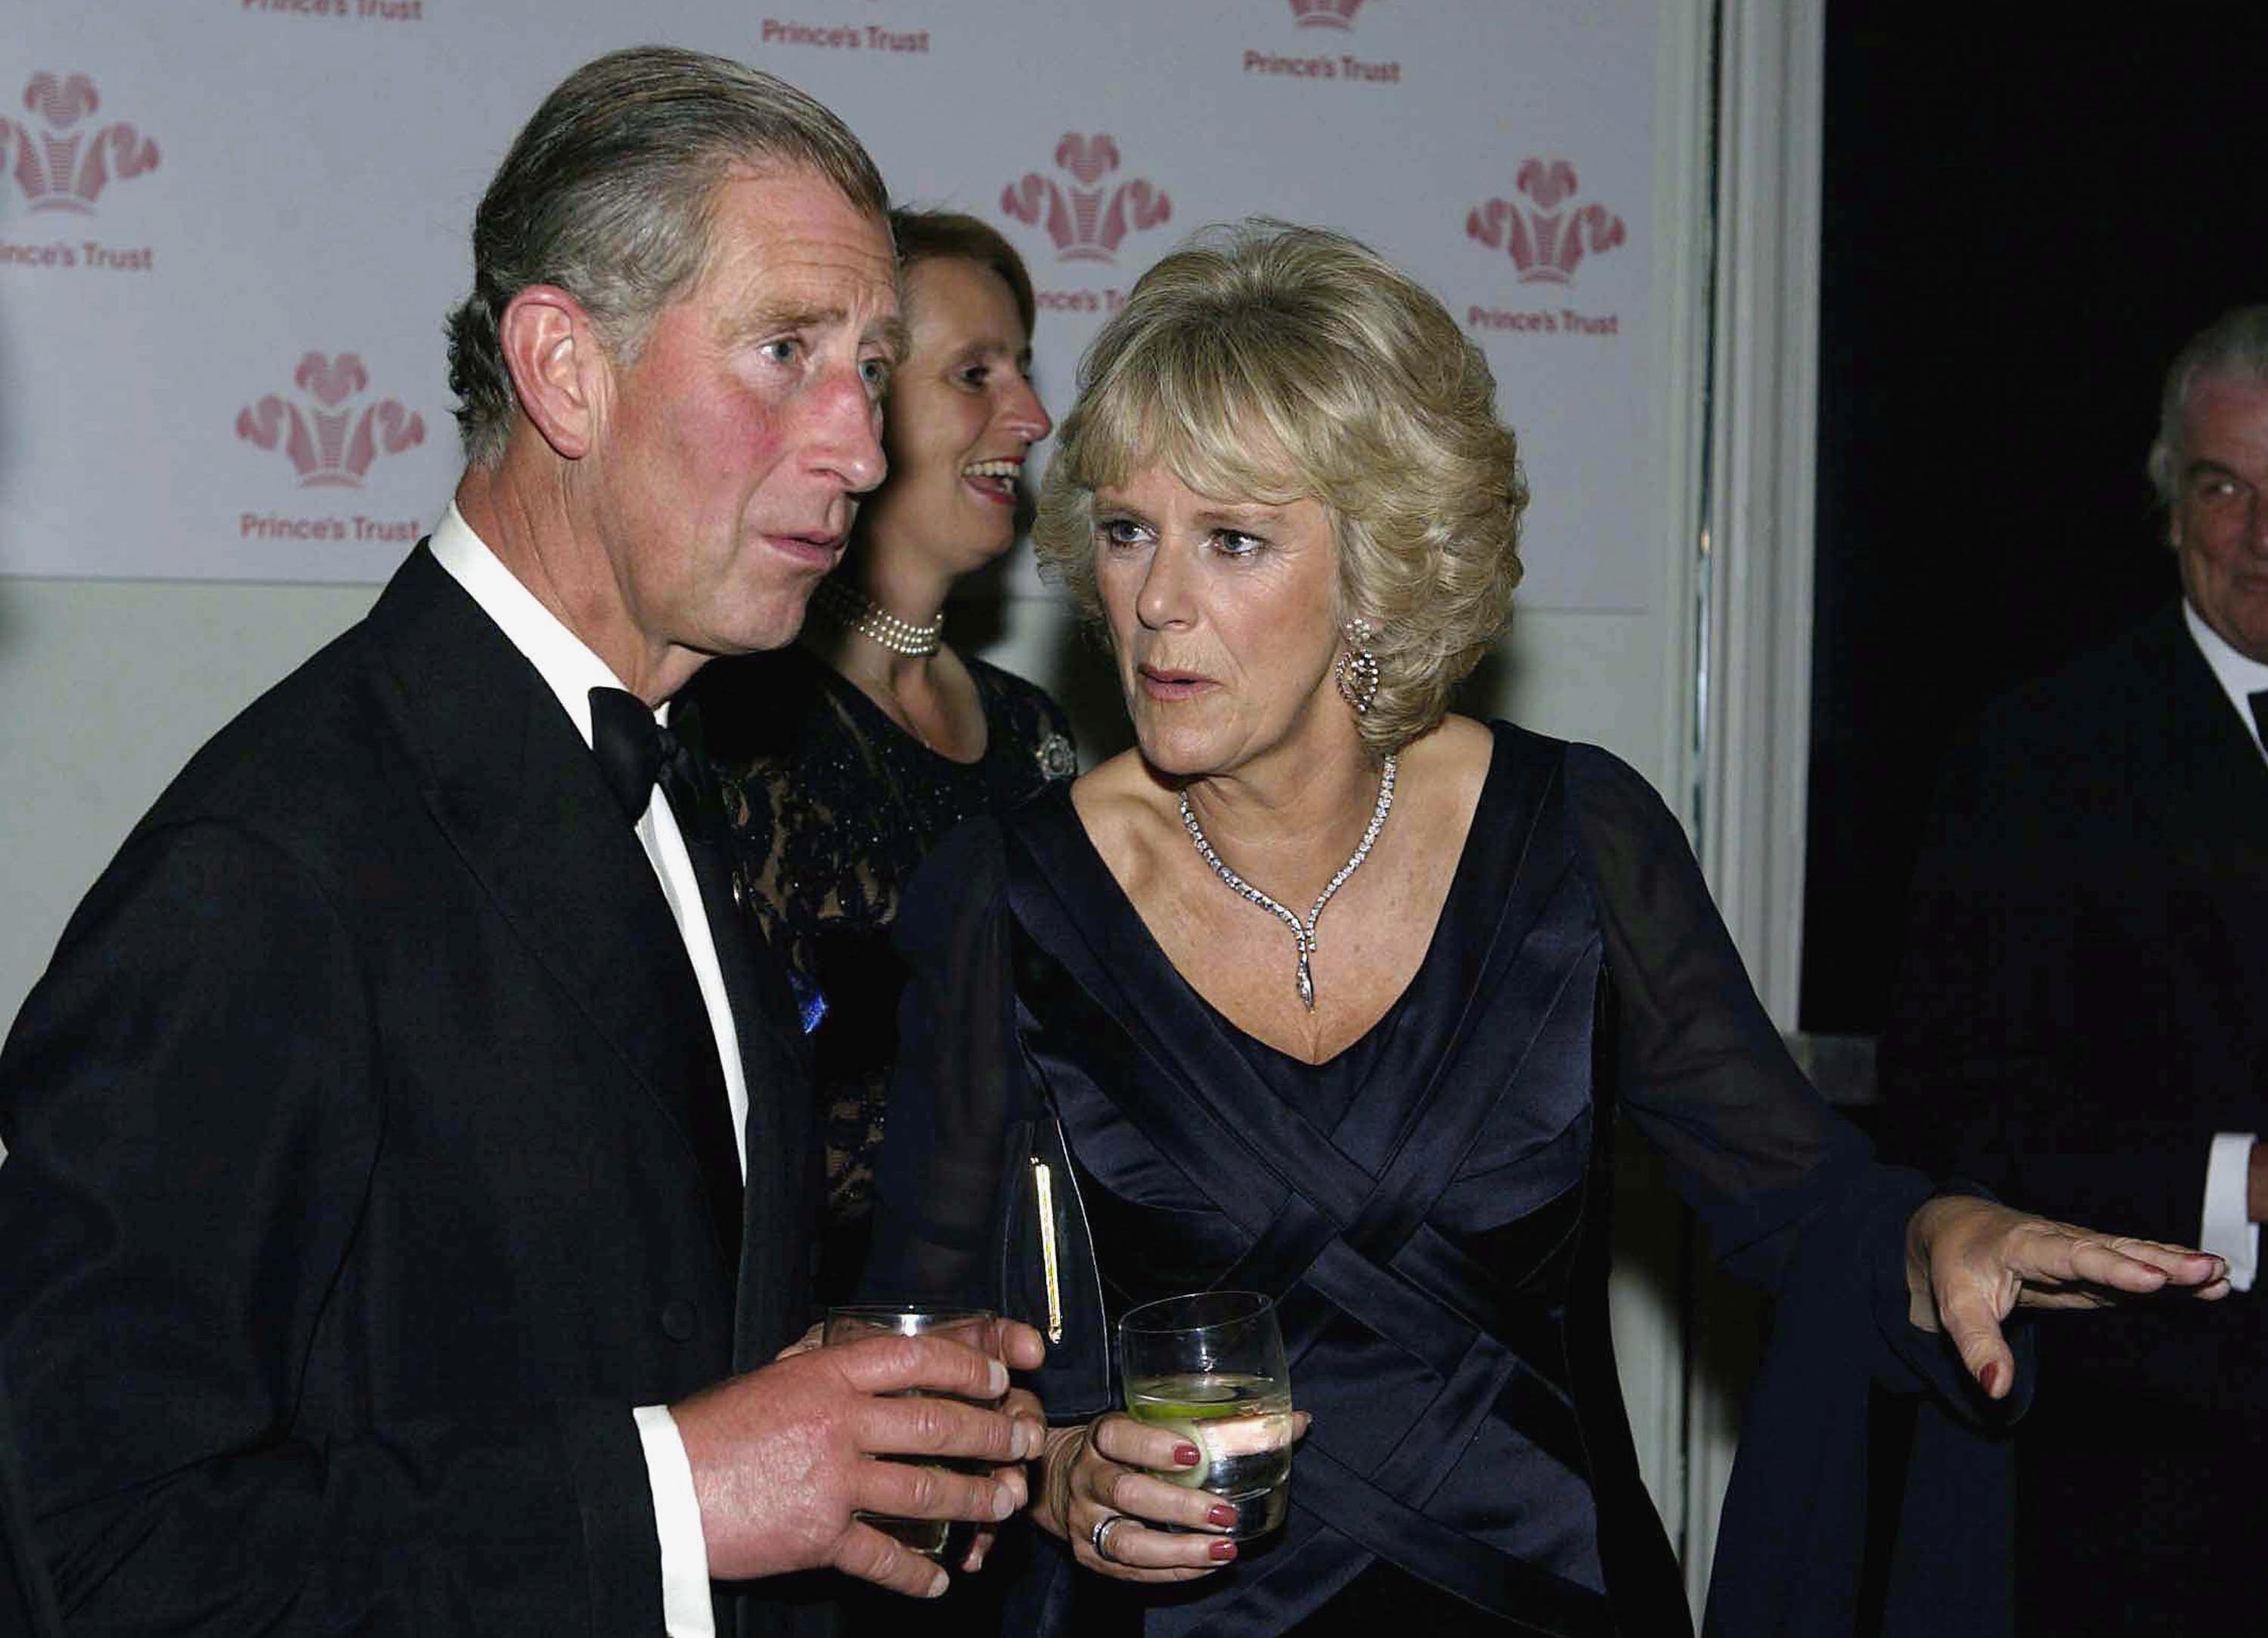  Prince Charles and Camilla Parker Bowles at the after party for the "Fashion Rocks" concert and fashion show on October 15, 2003 in London. | Source: Getty Images